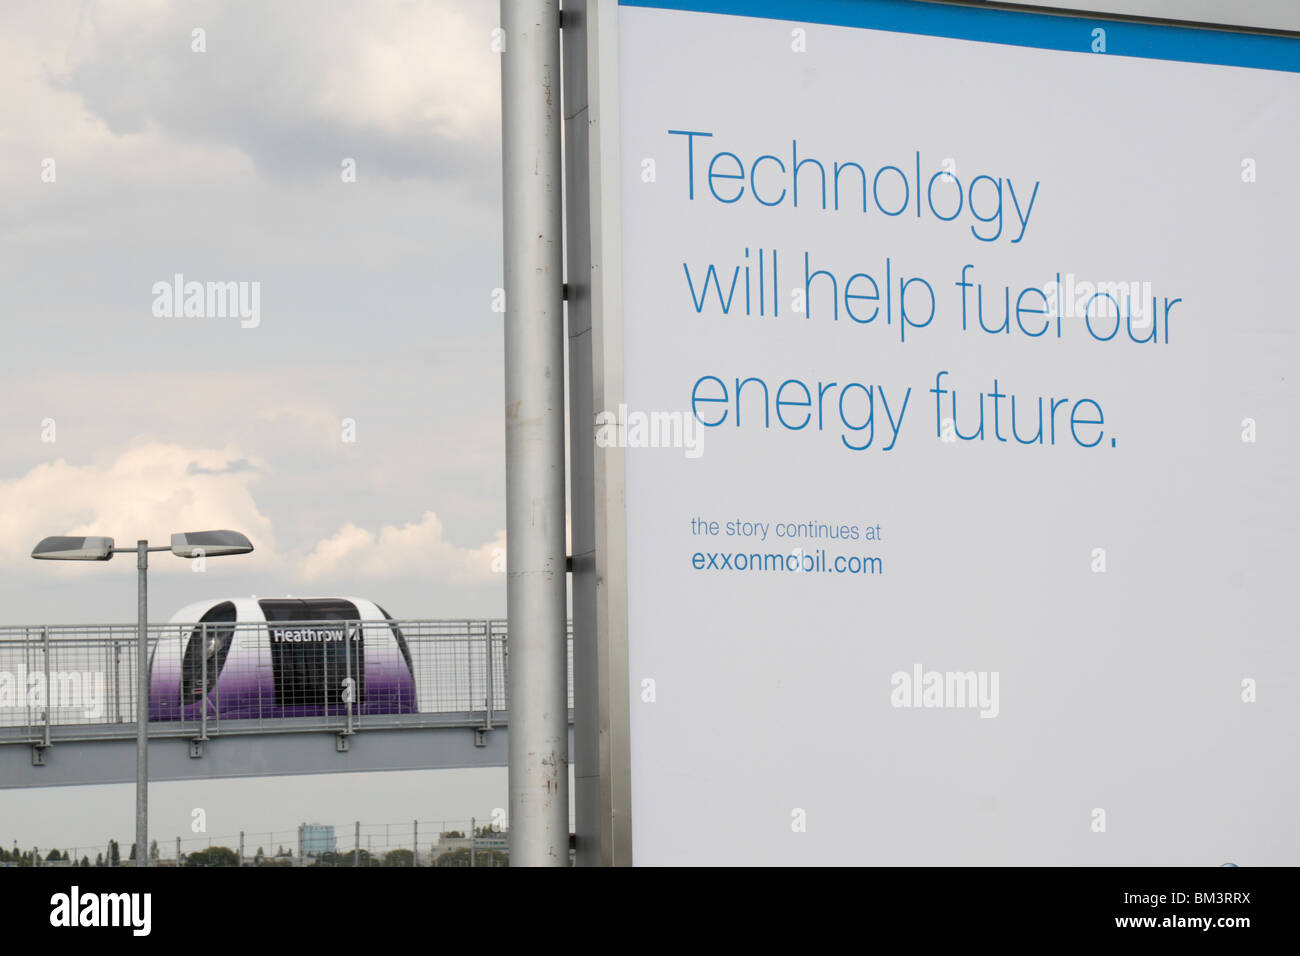 A Personal Rapid Transport (PRT) pod passes a poignant Exxon ad about the future benefit of technology to energy conservation. Stock Photo